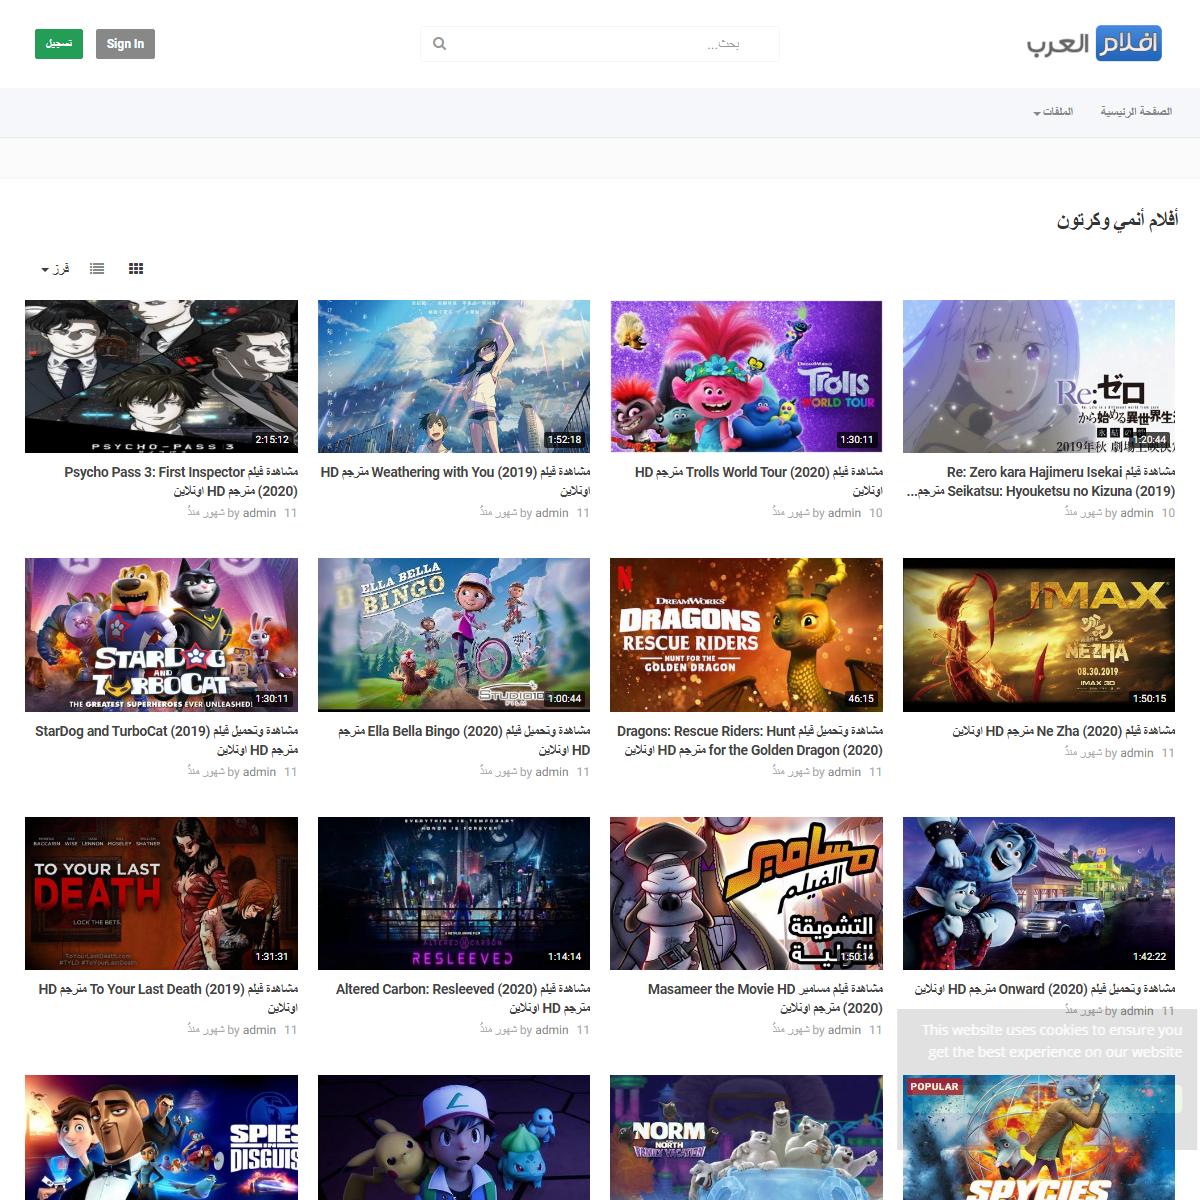 A complete backup of https://arab-moviez.tv/category.php?cat=anime-movies&page=3&order=DESC